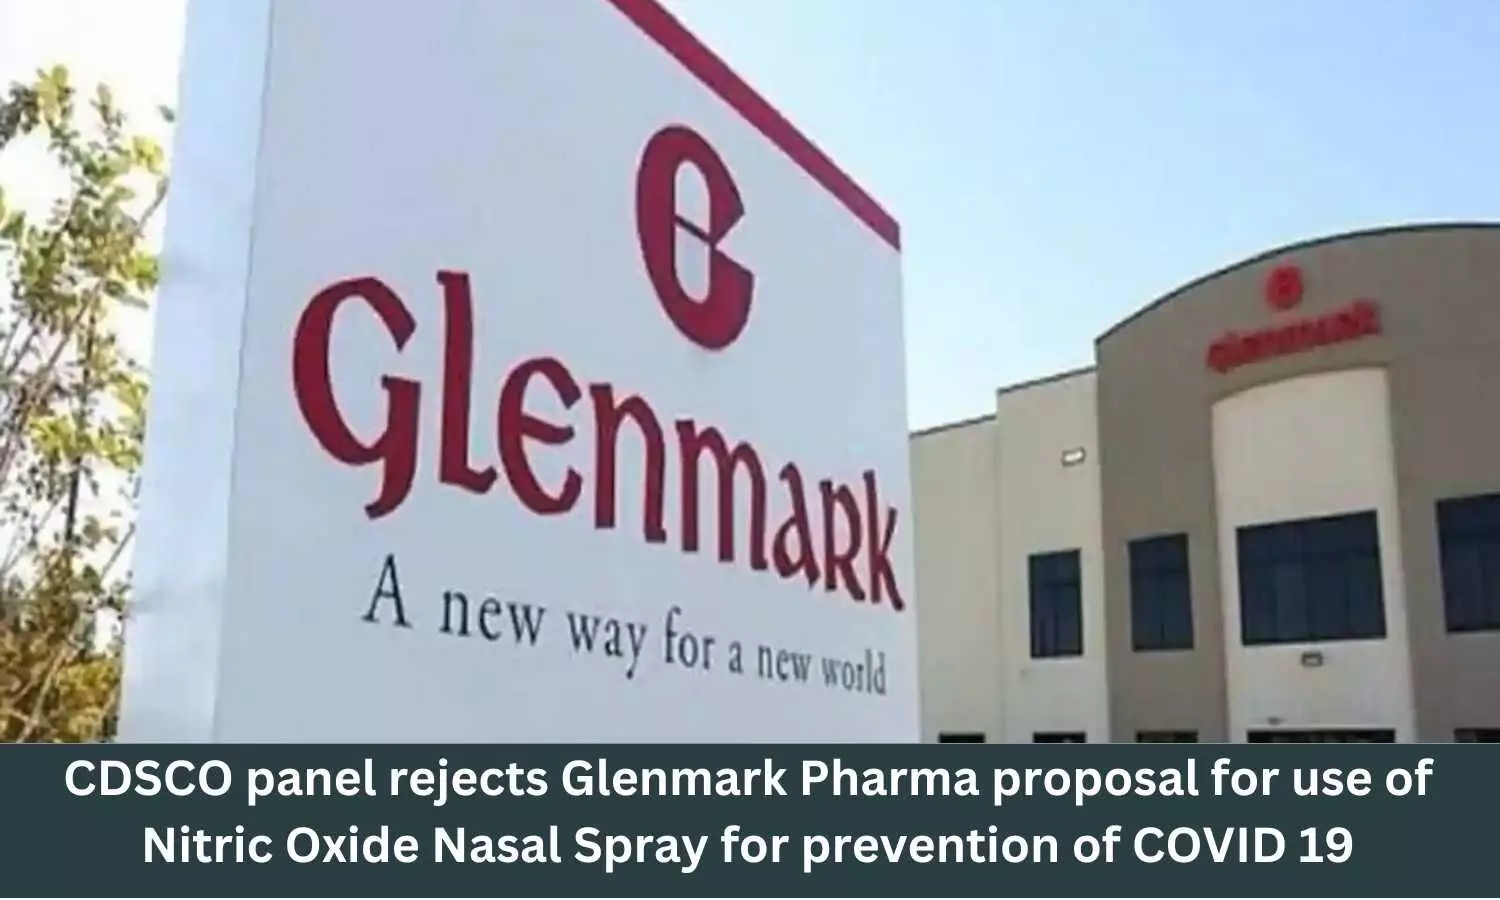 CDSCO panel rejects Glenmark proposal for use of Nitric Oxide Nasal Spray for prevention of COVID 19